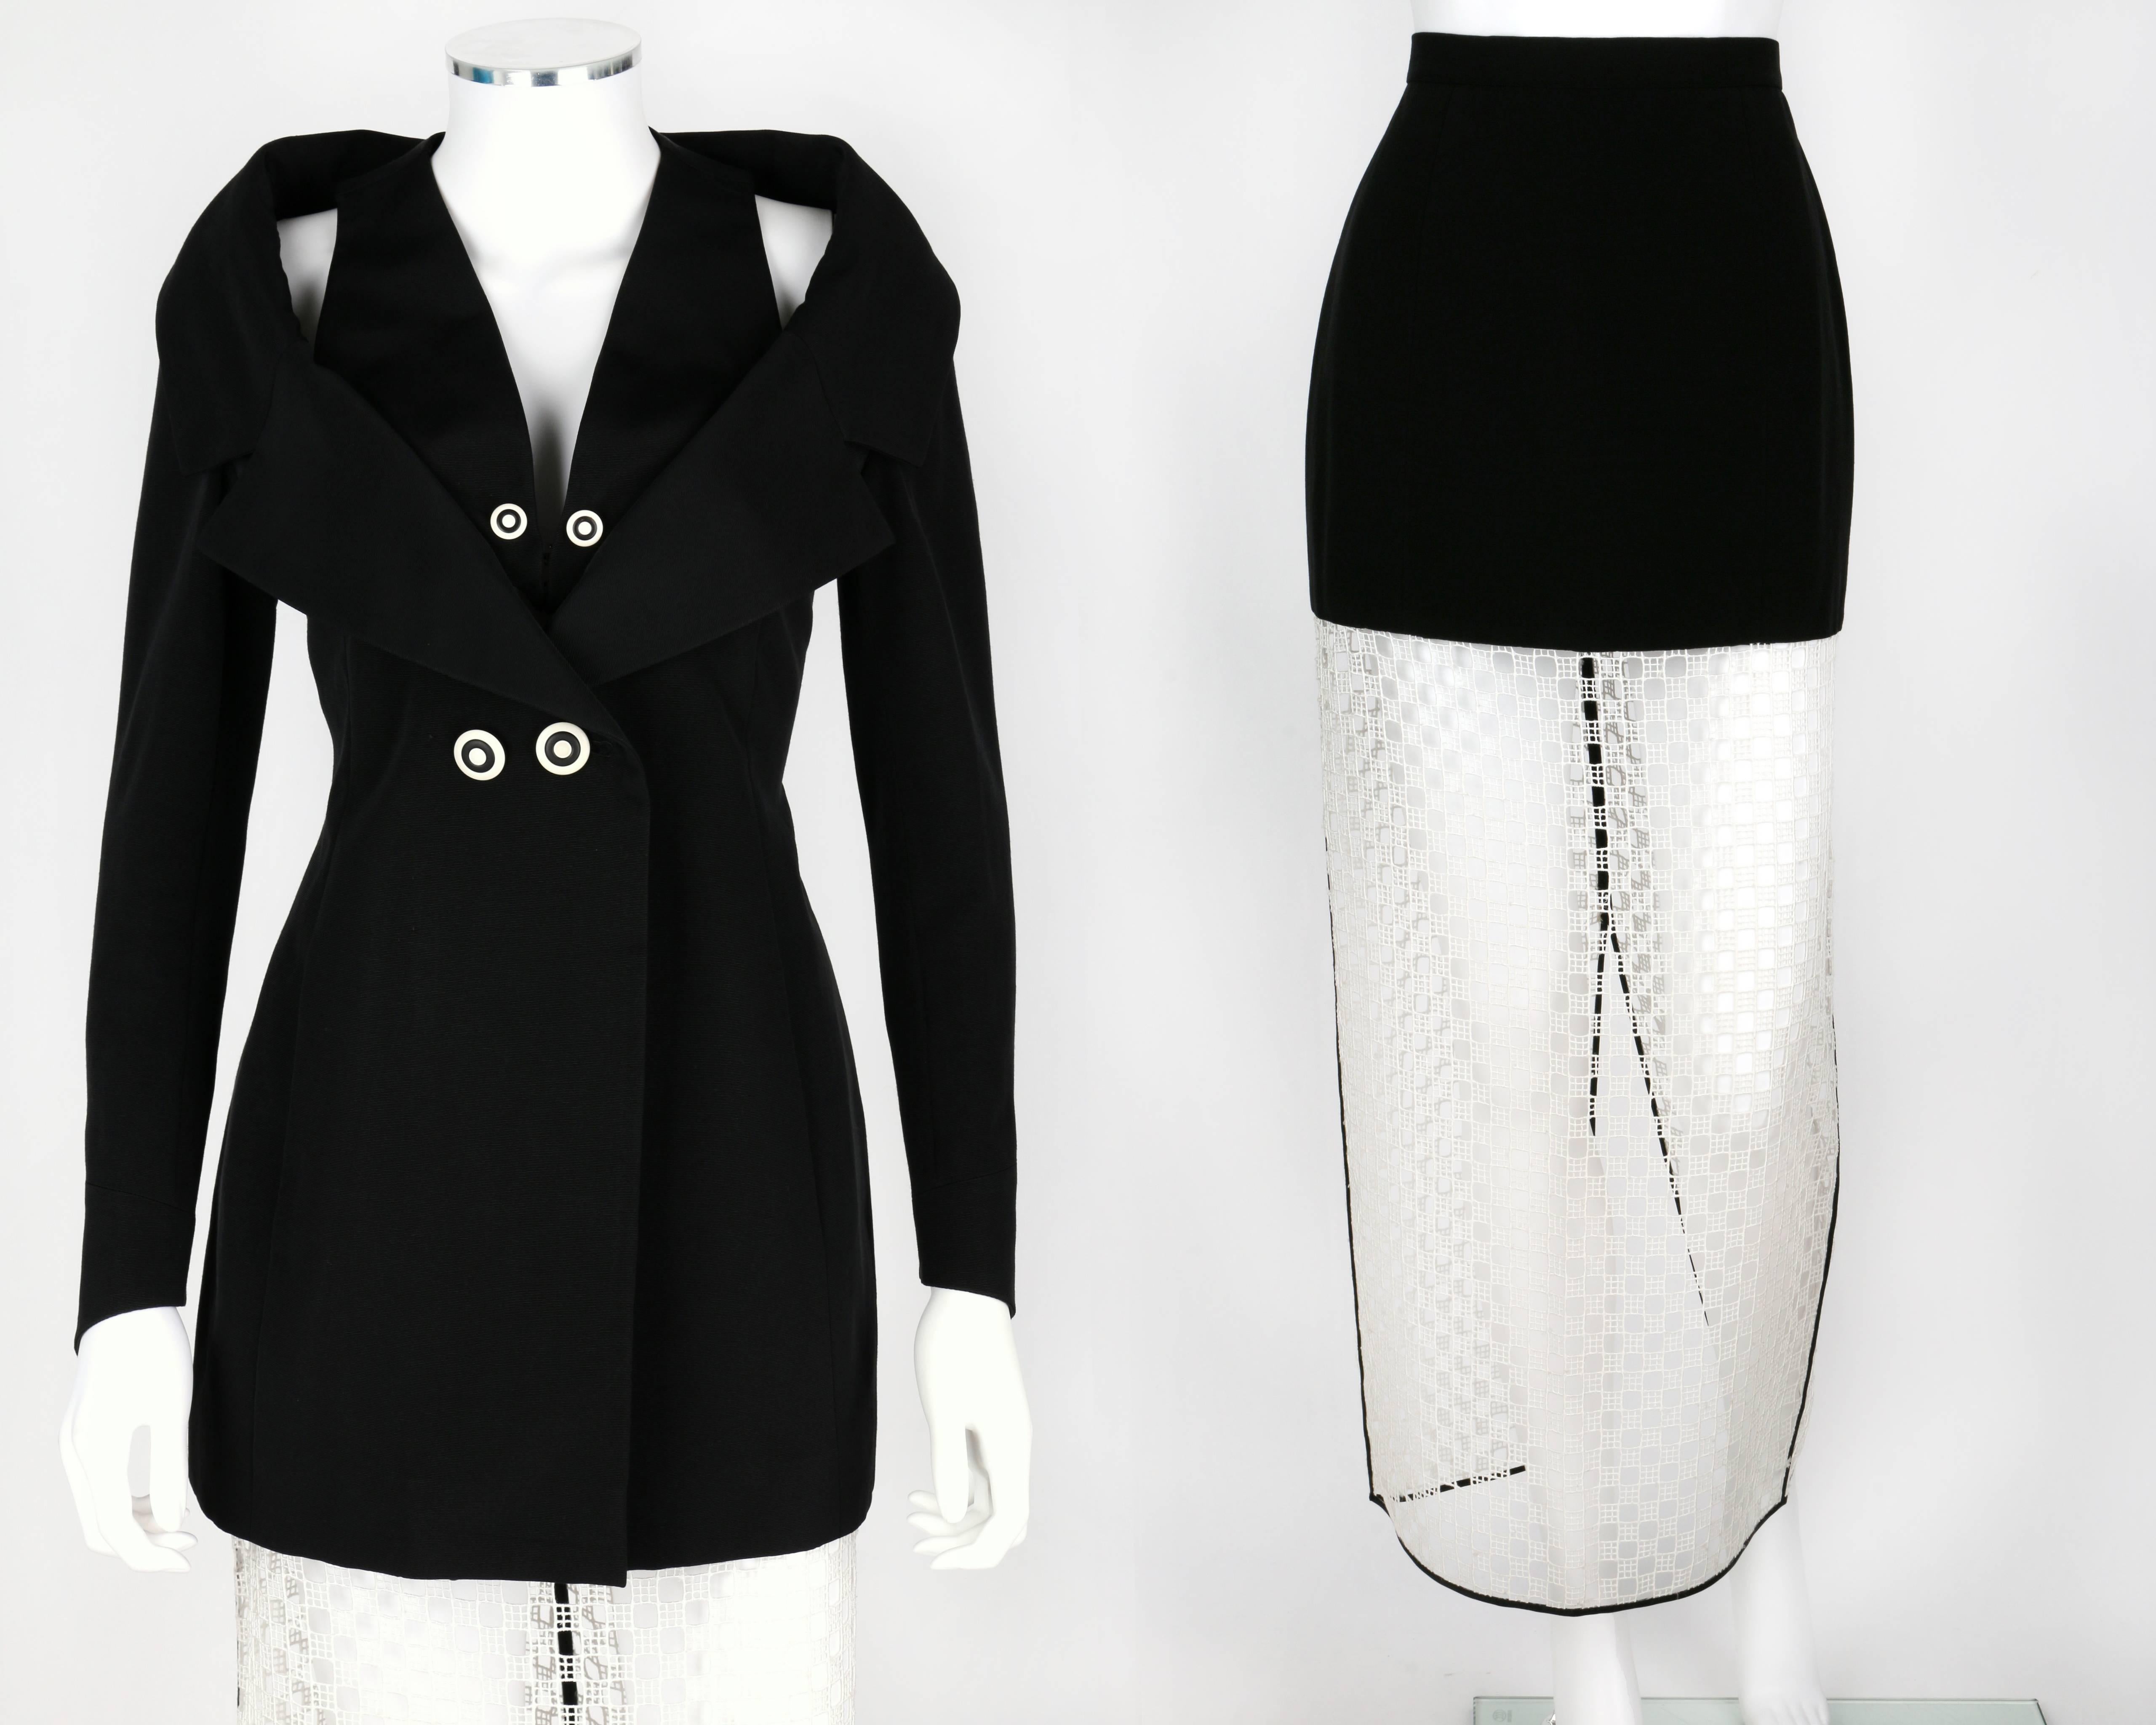 Vintage 1980's Karl Lagerfeld two-piece Avant-Garde skirt suit. Jacket has a layered/structured collar. Black and white contrasting 